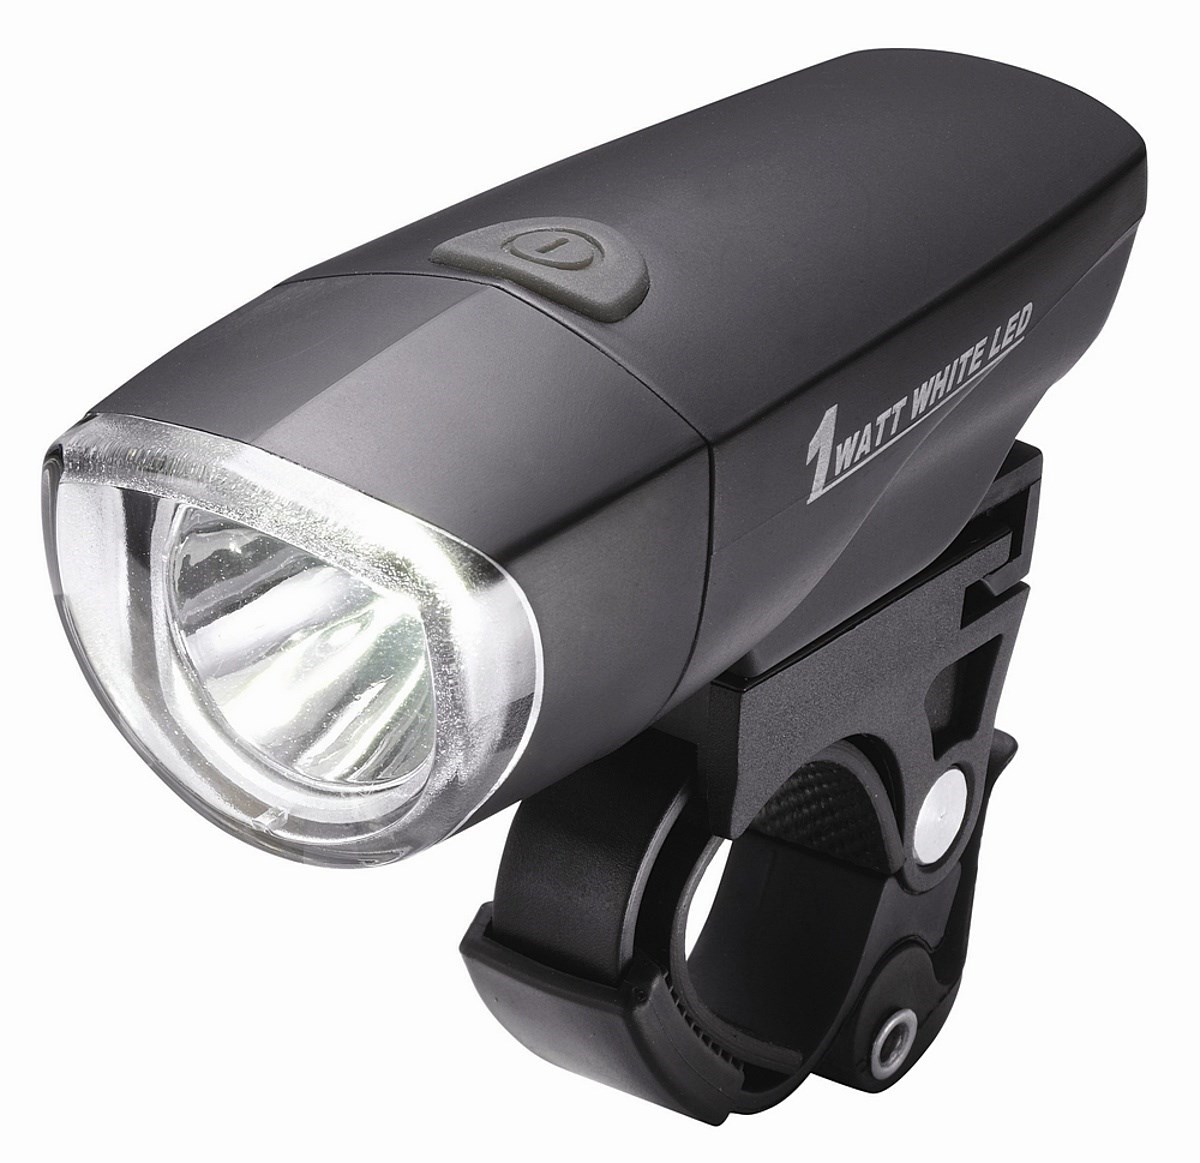 Torch High Beamer 1w Compact LED Front Light product image